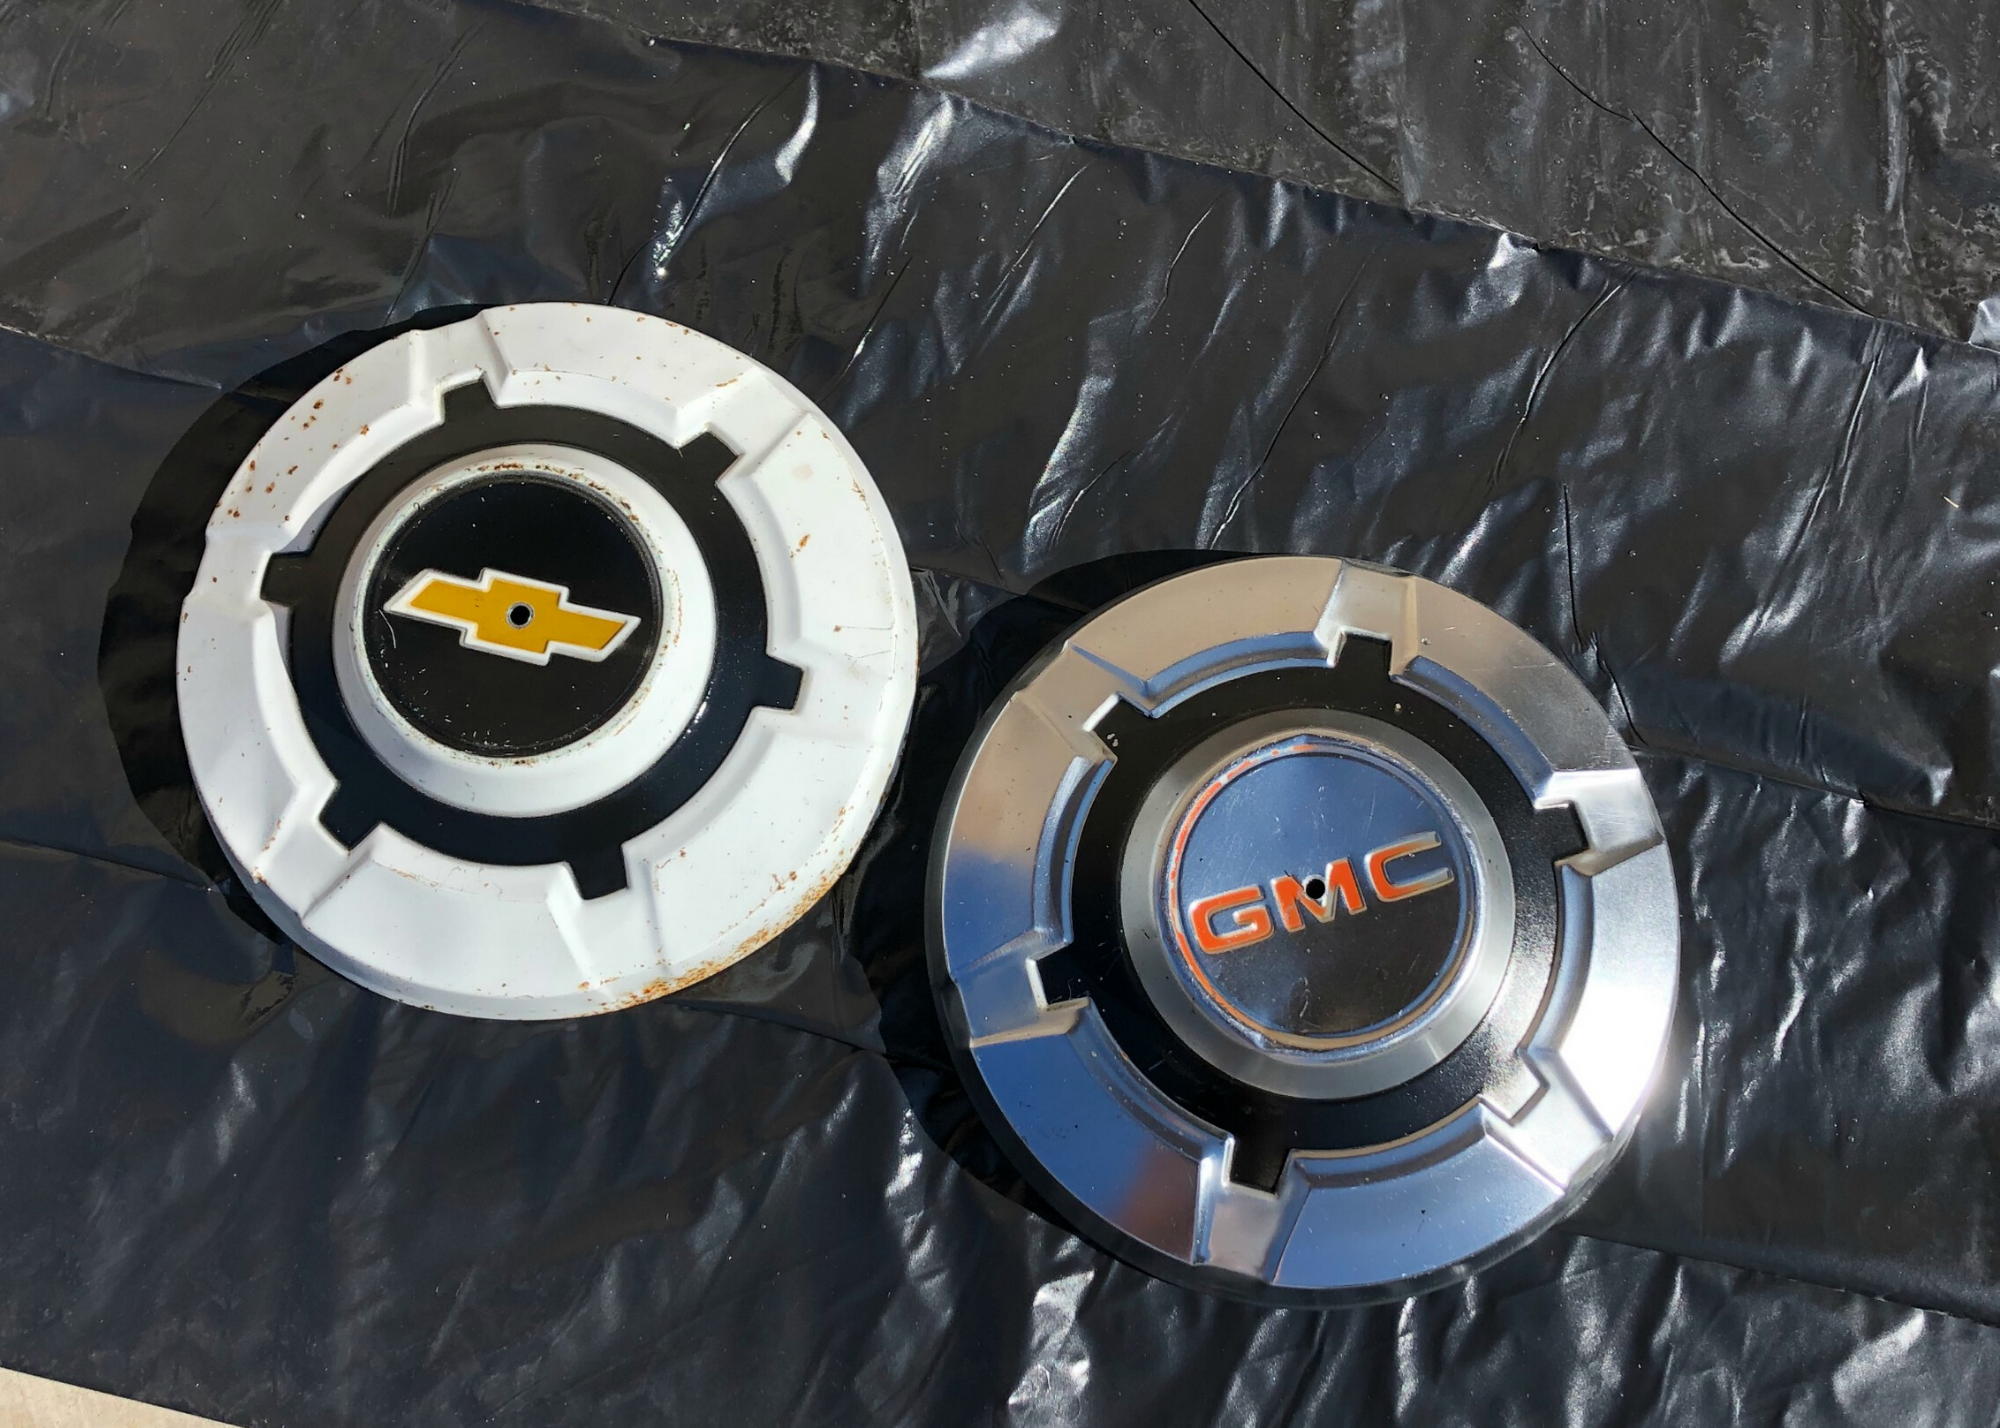 Upcycled Hubcap Clock